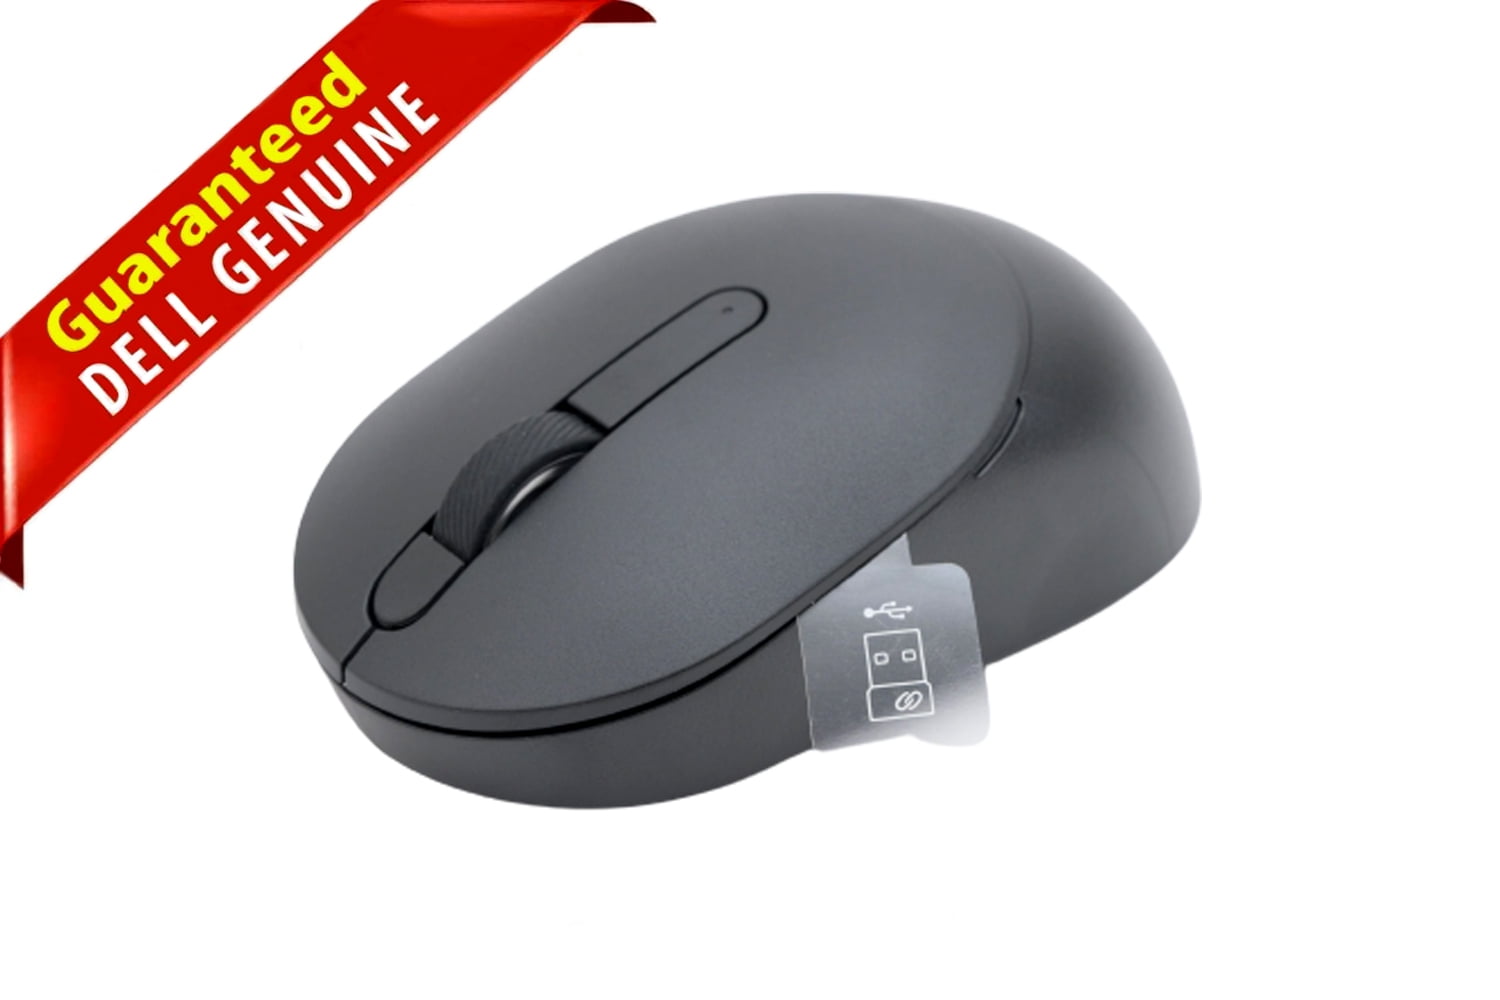 Dell Mobile Pro Wireless Mouse - MS5120W - Black